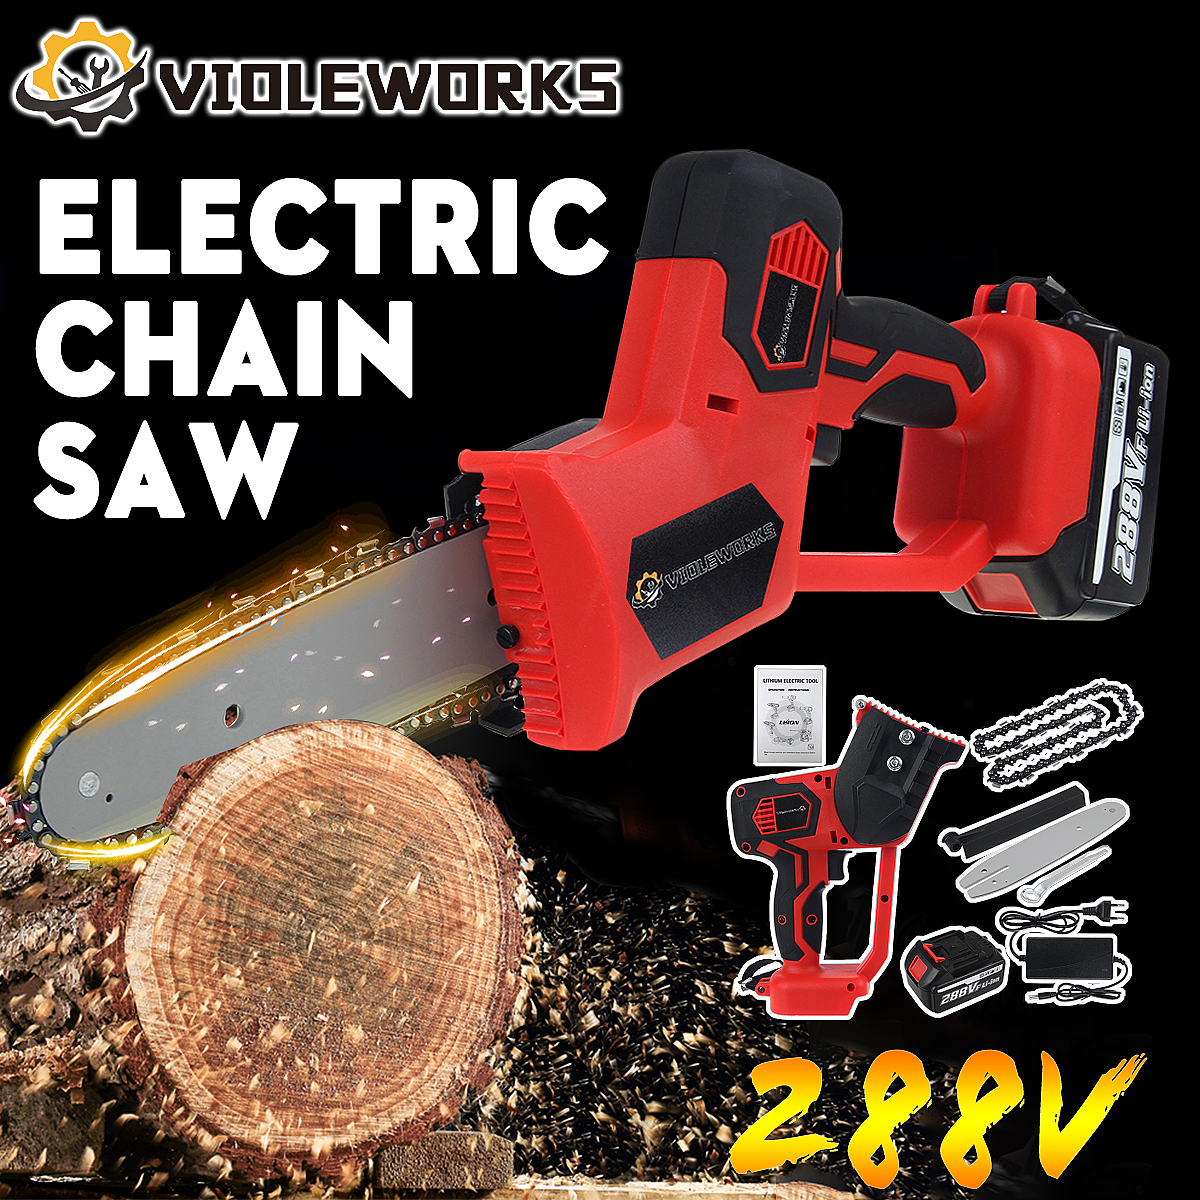 VIOLEWORKS-8-Inch-288VF-Electric-Chainsaw-Cordless-Wood-Cutter-One-Hand-Saw-Woodworking-Saw-with-12p-1768830-2